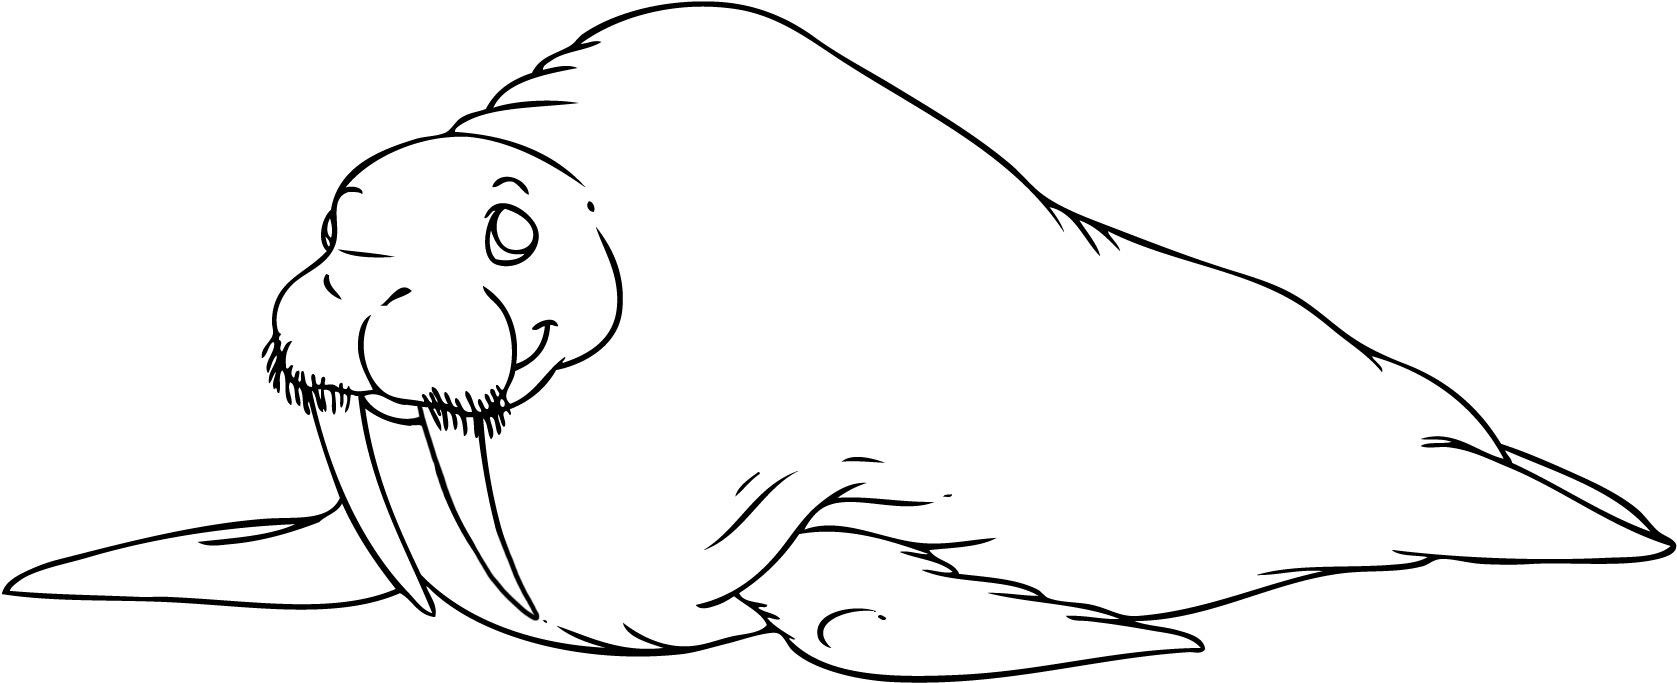 walrus coloring pages w is for walrus coloring page free printable coloring pages pages coloring walrus 